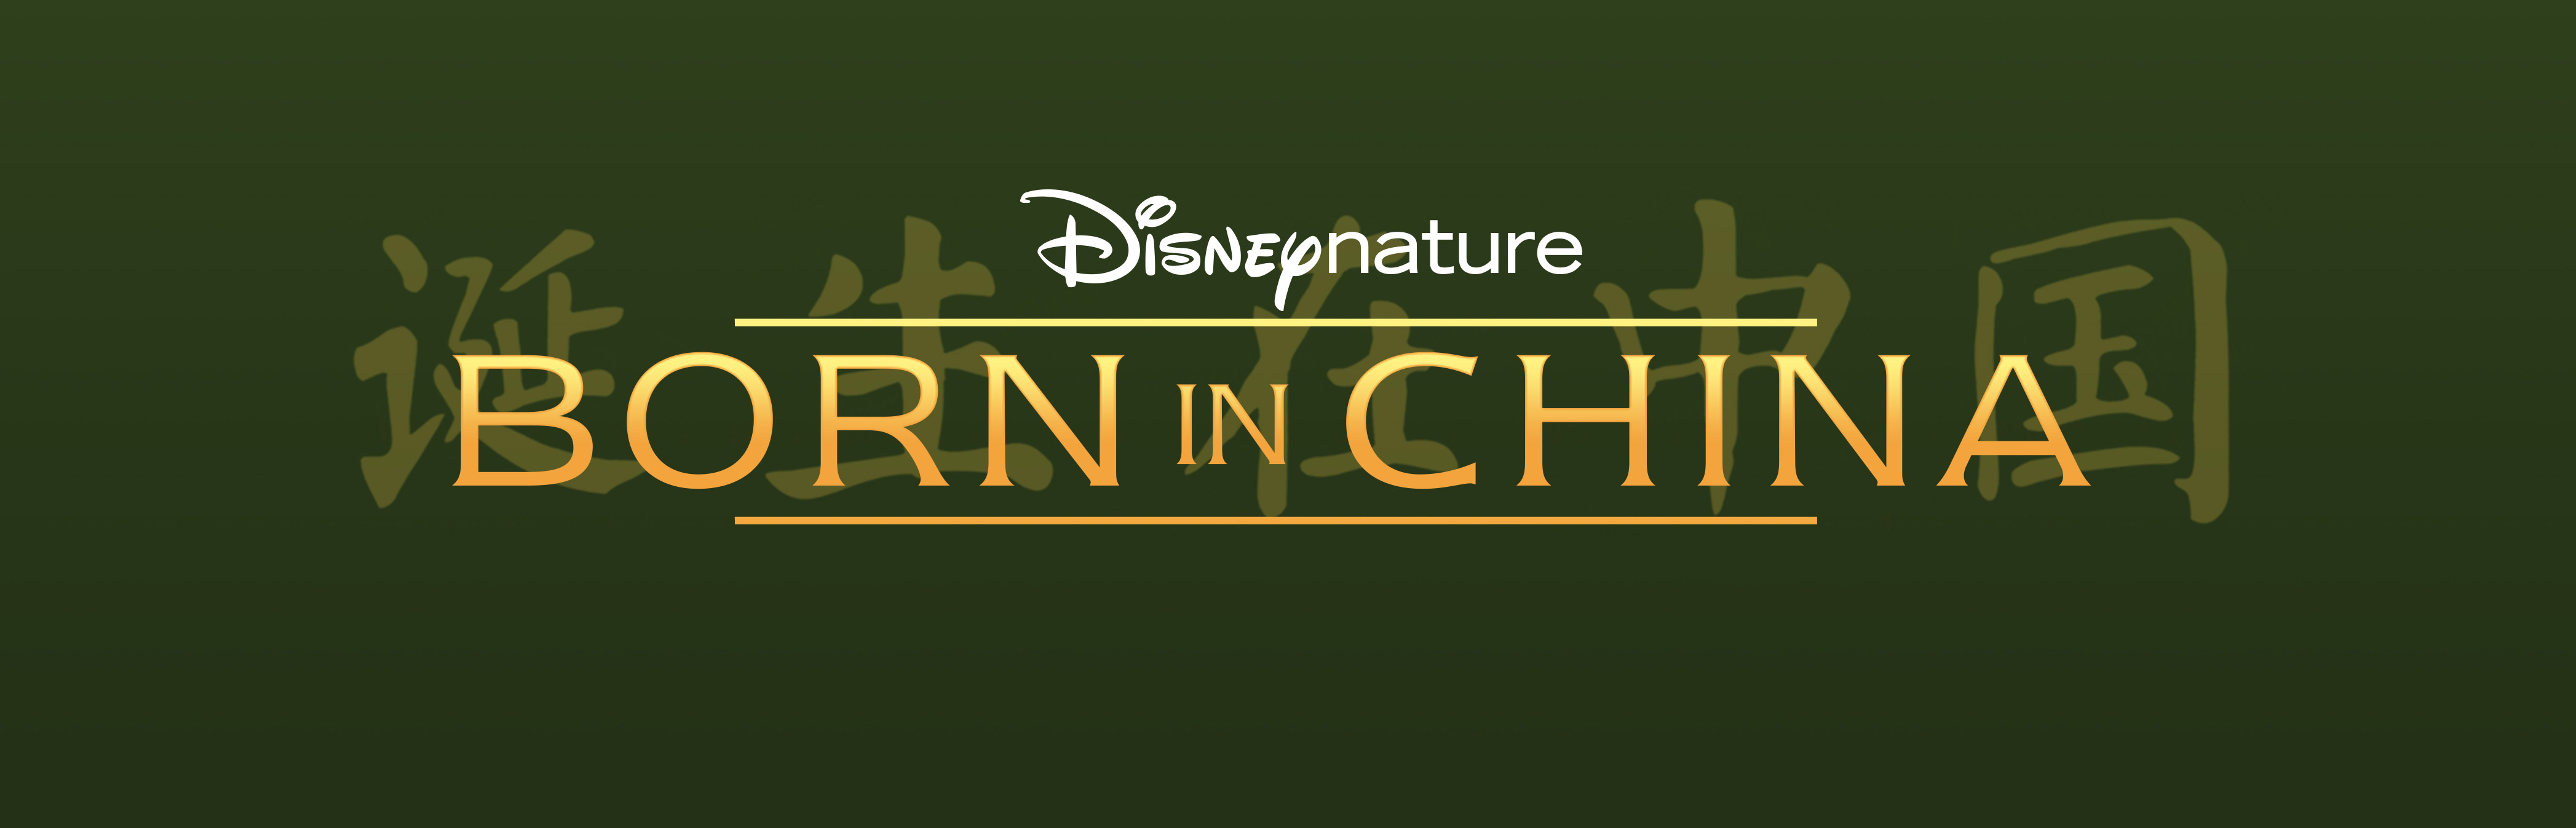 born_3strips_wip2_logo_only-with_correct_disneynature